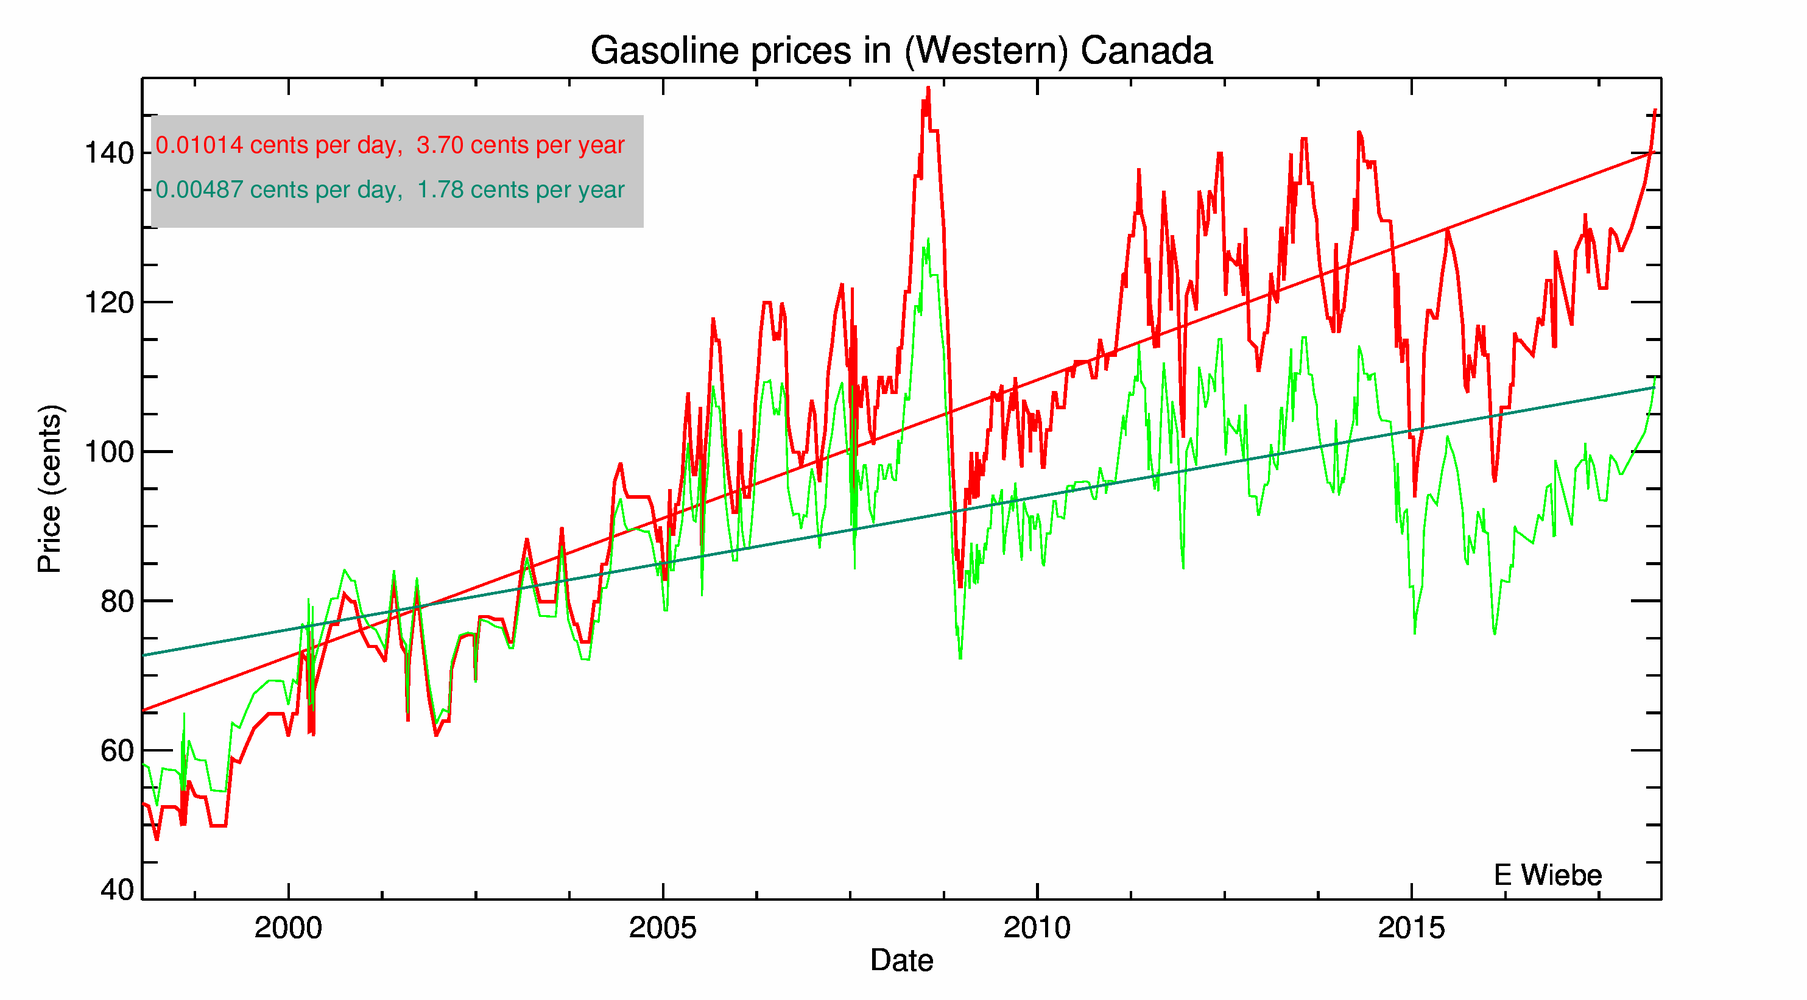 Gasoline prices plotted as a function of time between 1998 and 2004 - the fuel was mostly purchased in Victoria, BC but some was obtained as far east as Toronto